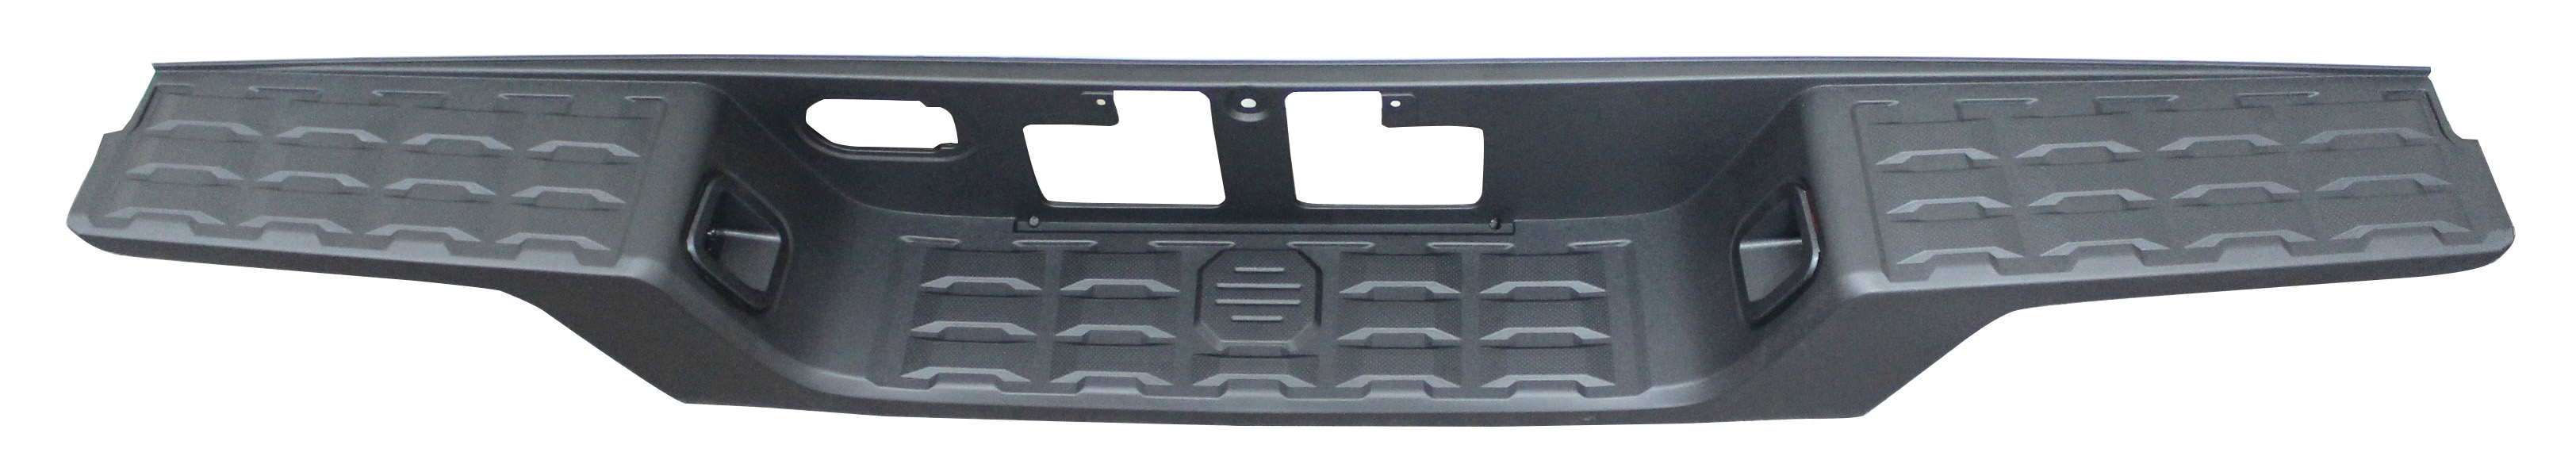 Aftermarket METAL REAR BUMPERS for TOYOTA - TACOMA, TACOMA,16-23,Rear bumper step pad